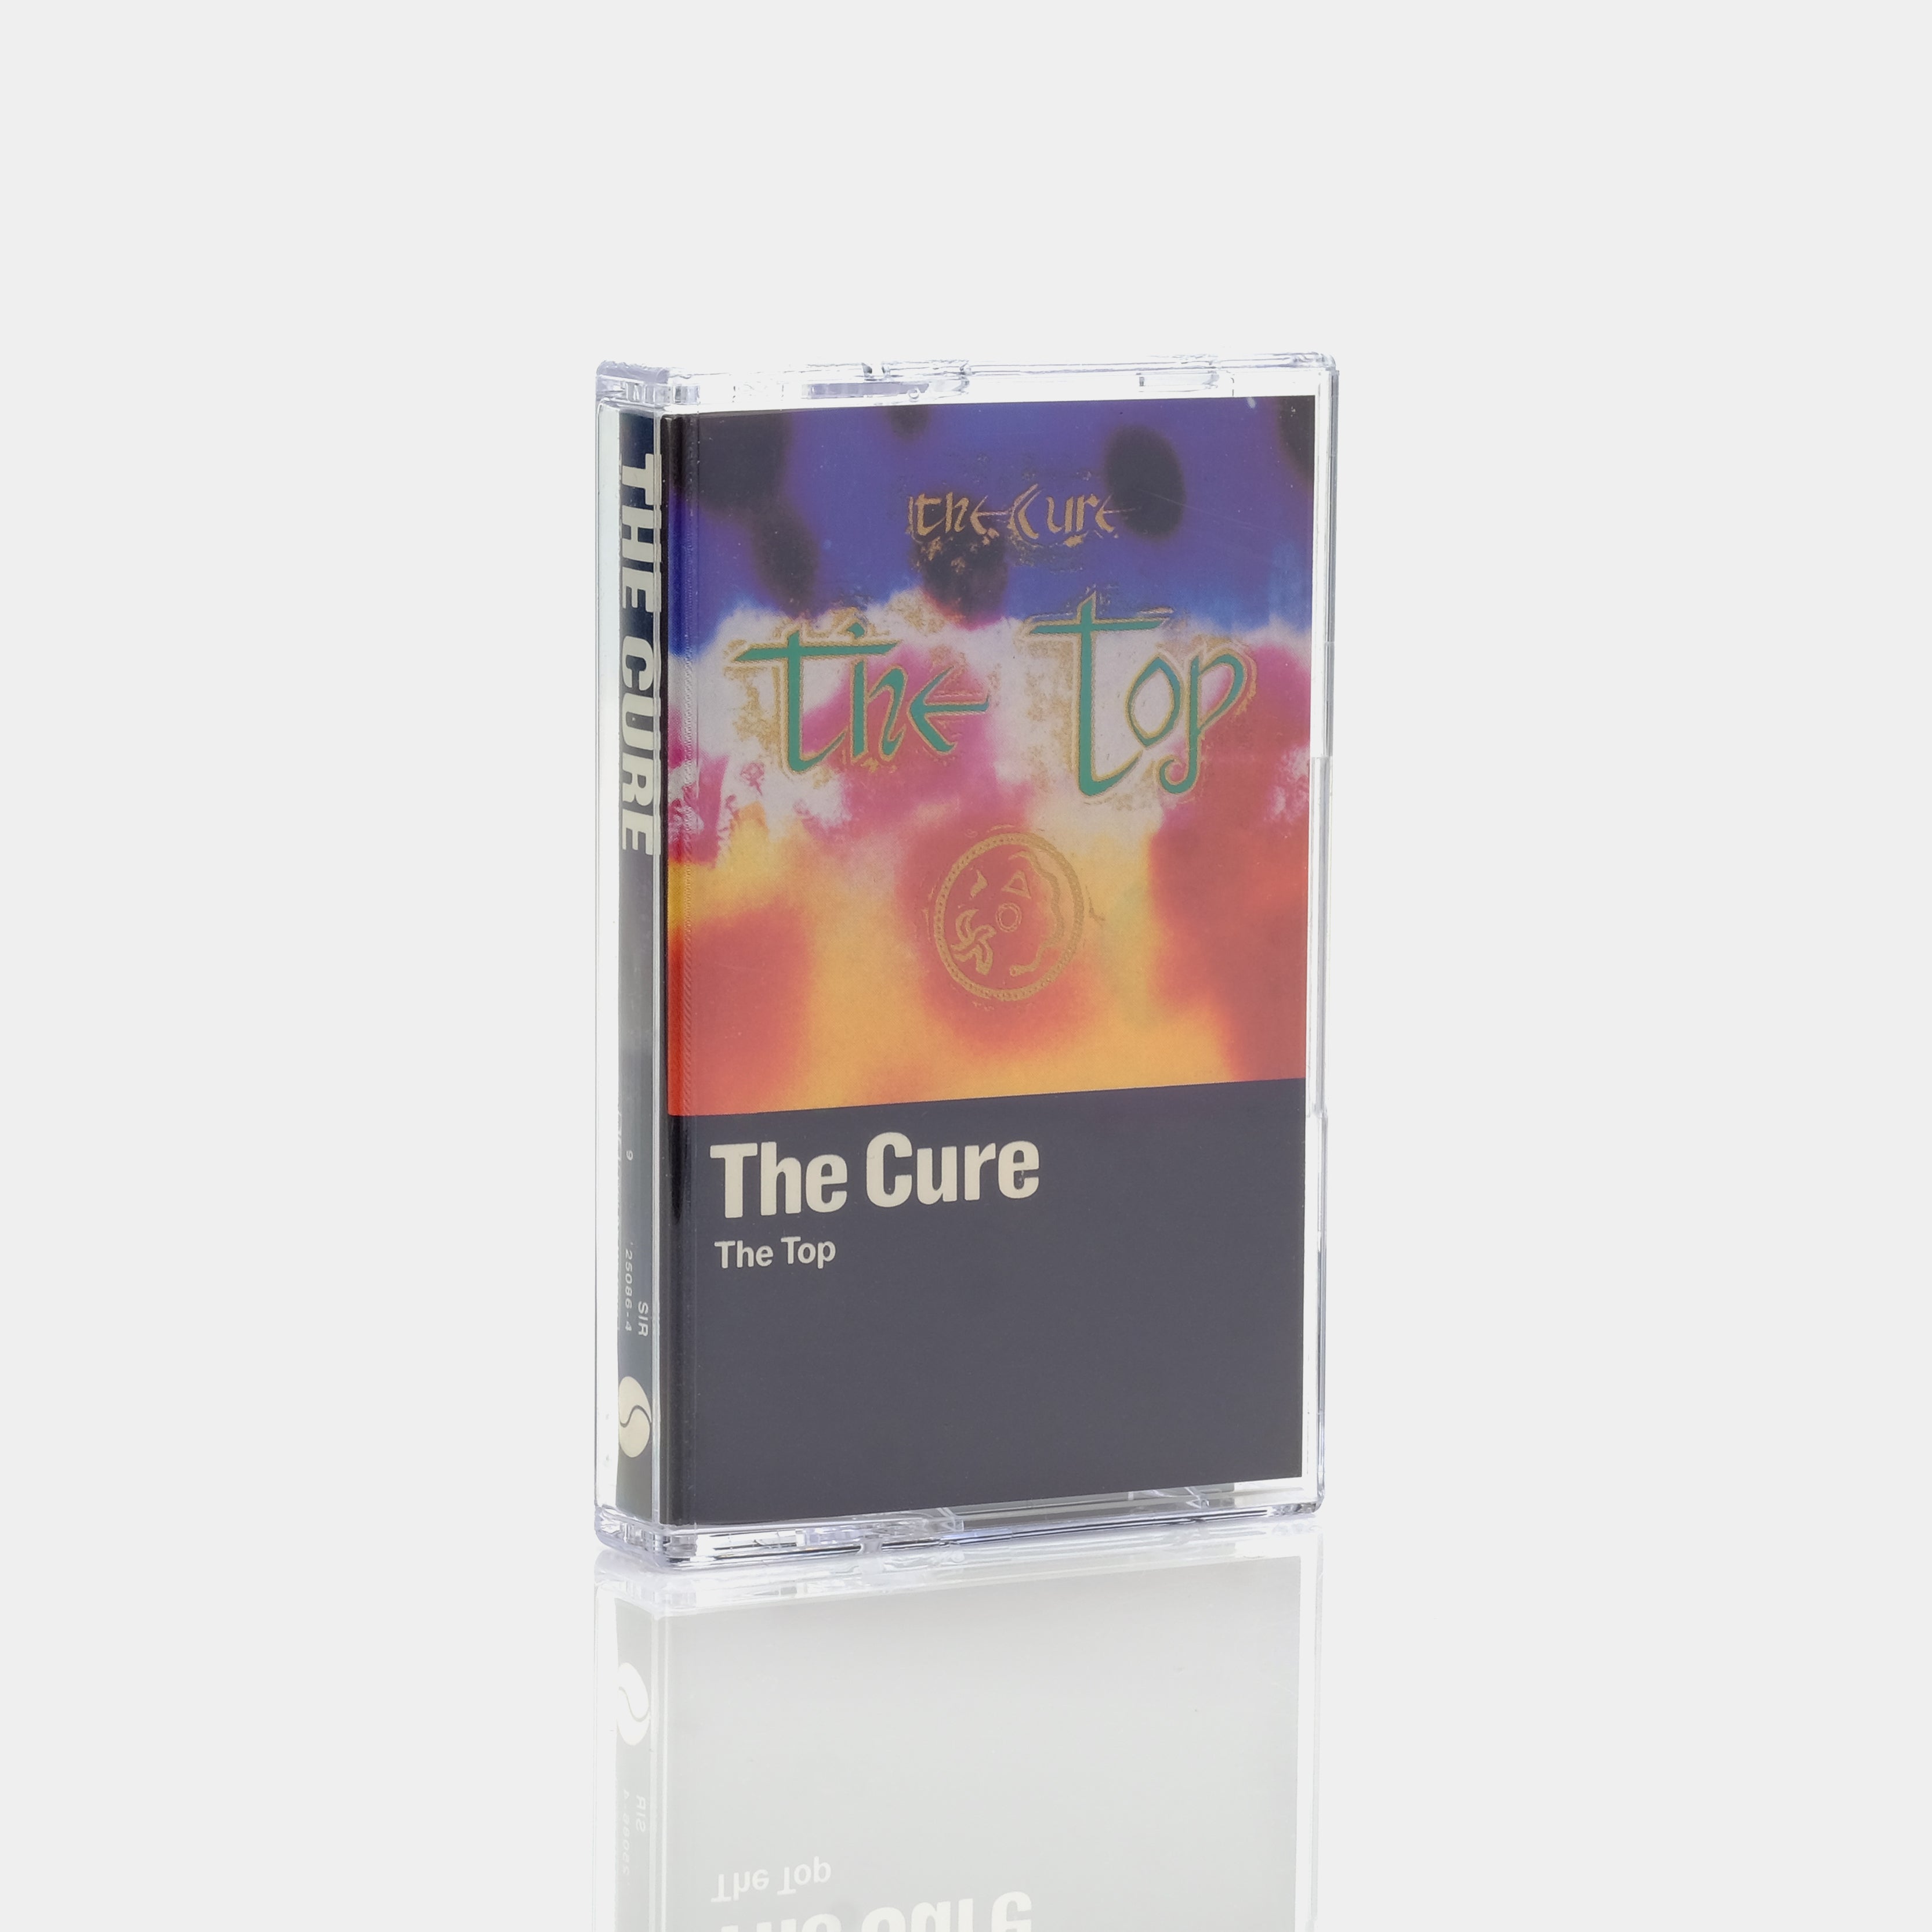 The Cure - The Top Cassette Tape